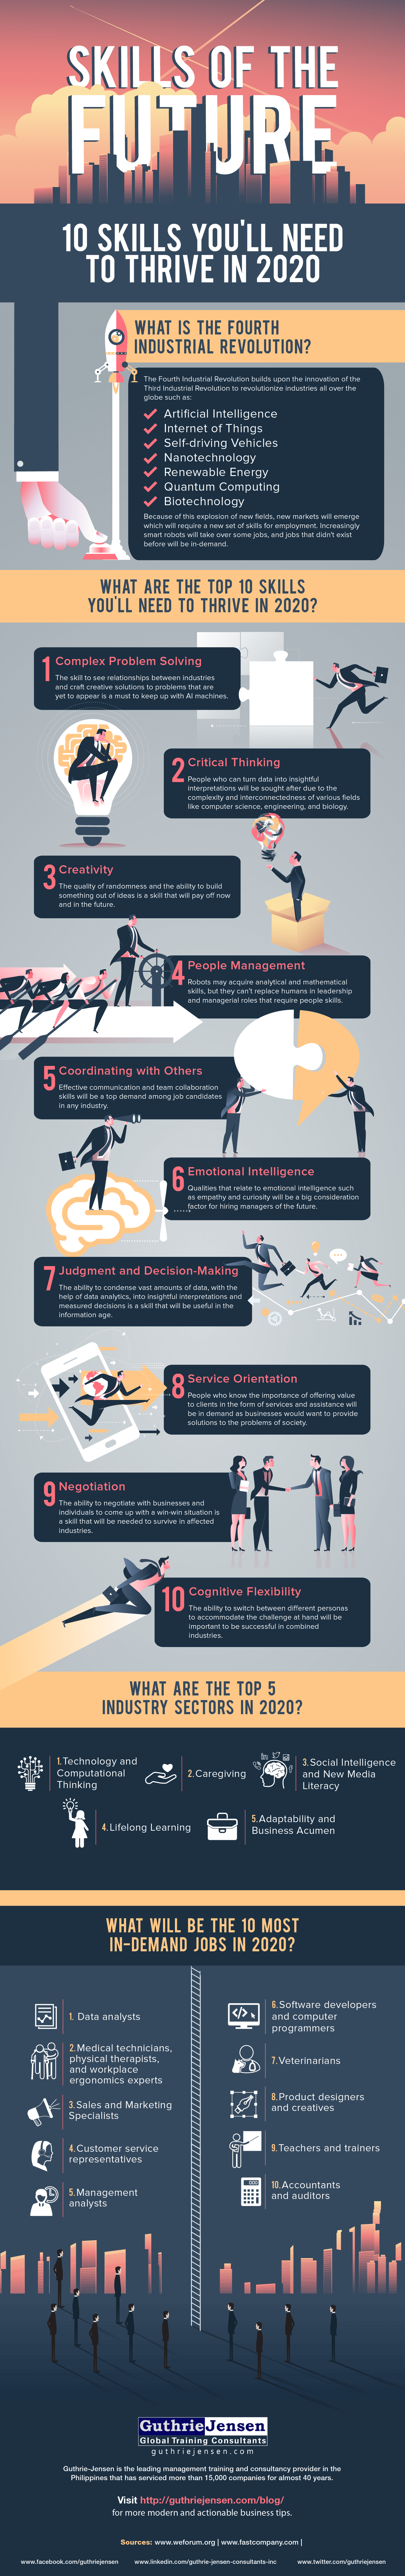 10 important skills for the future- Infographic